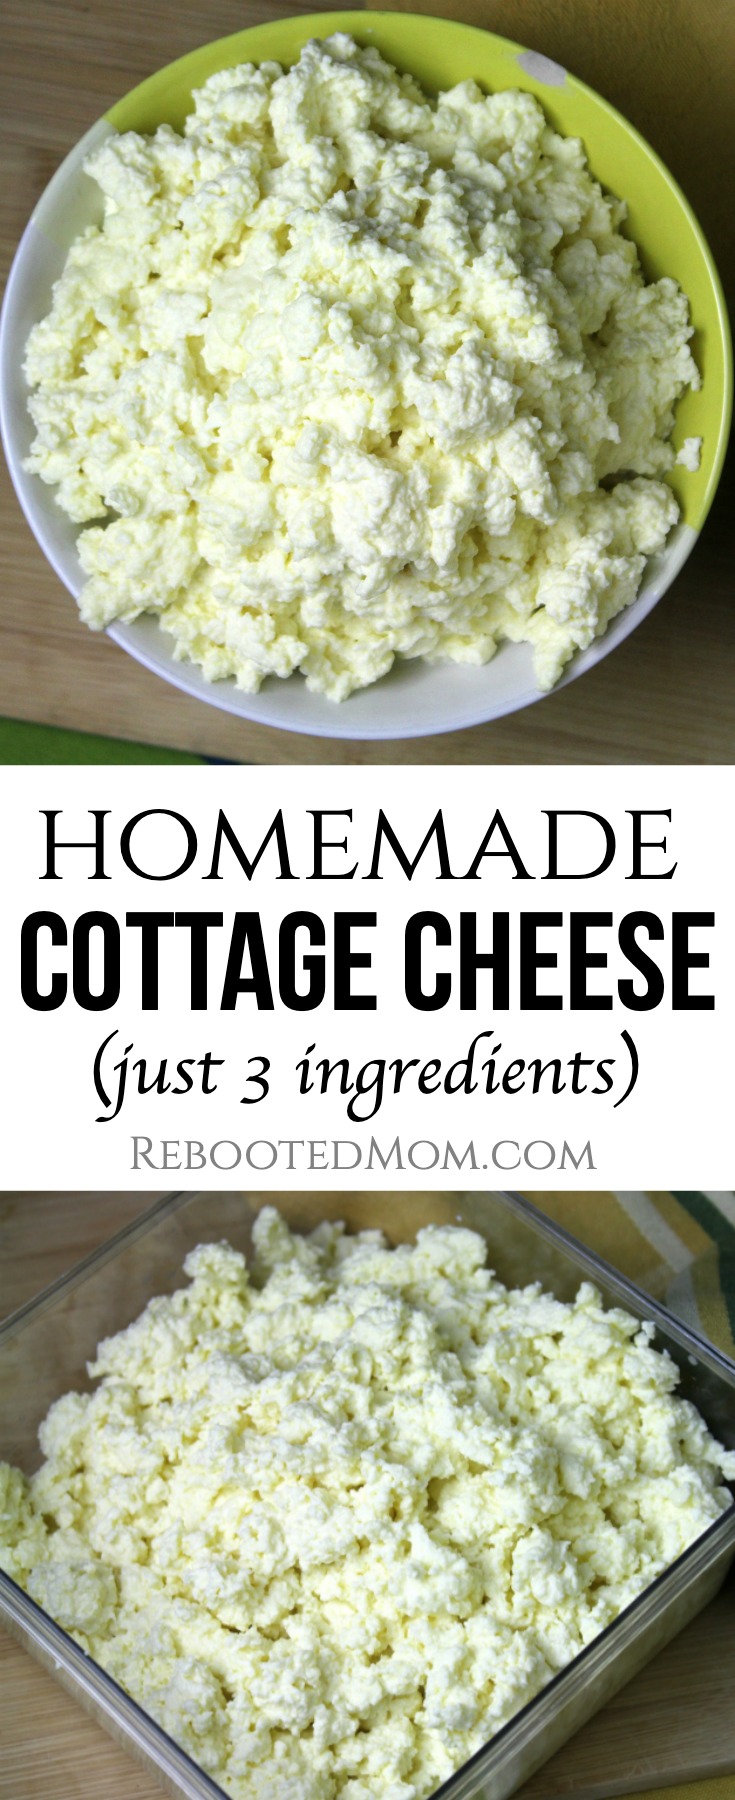 Homemade Cottage Cheese - Rebooted Mom